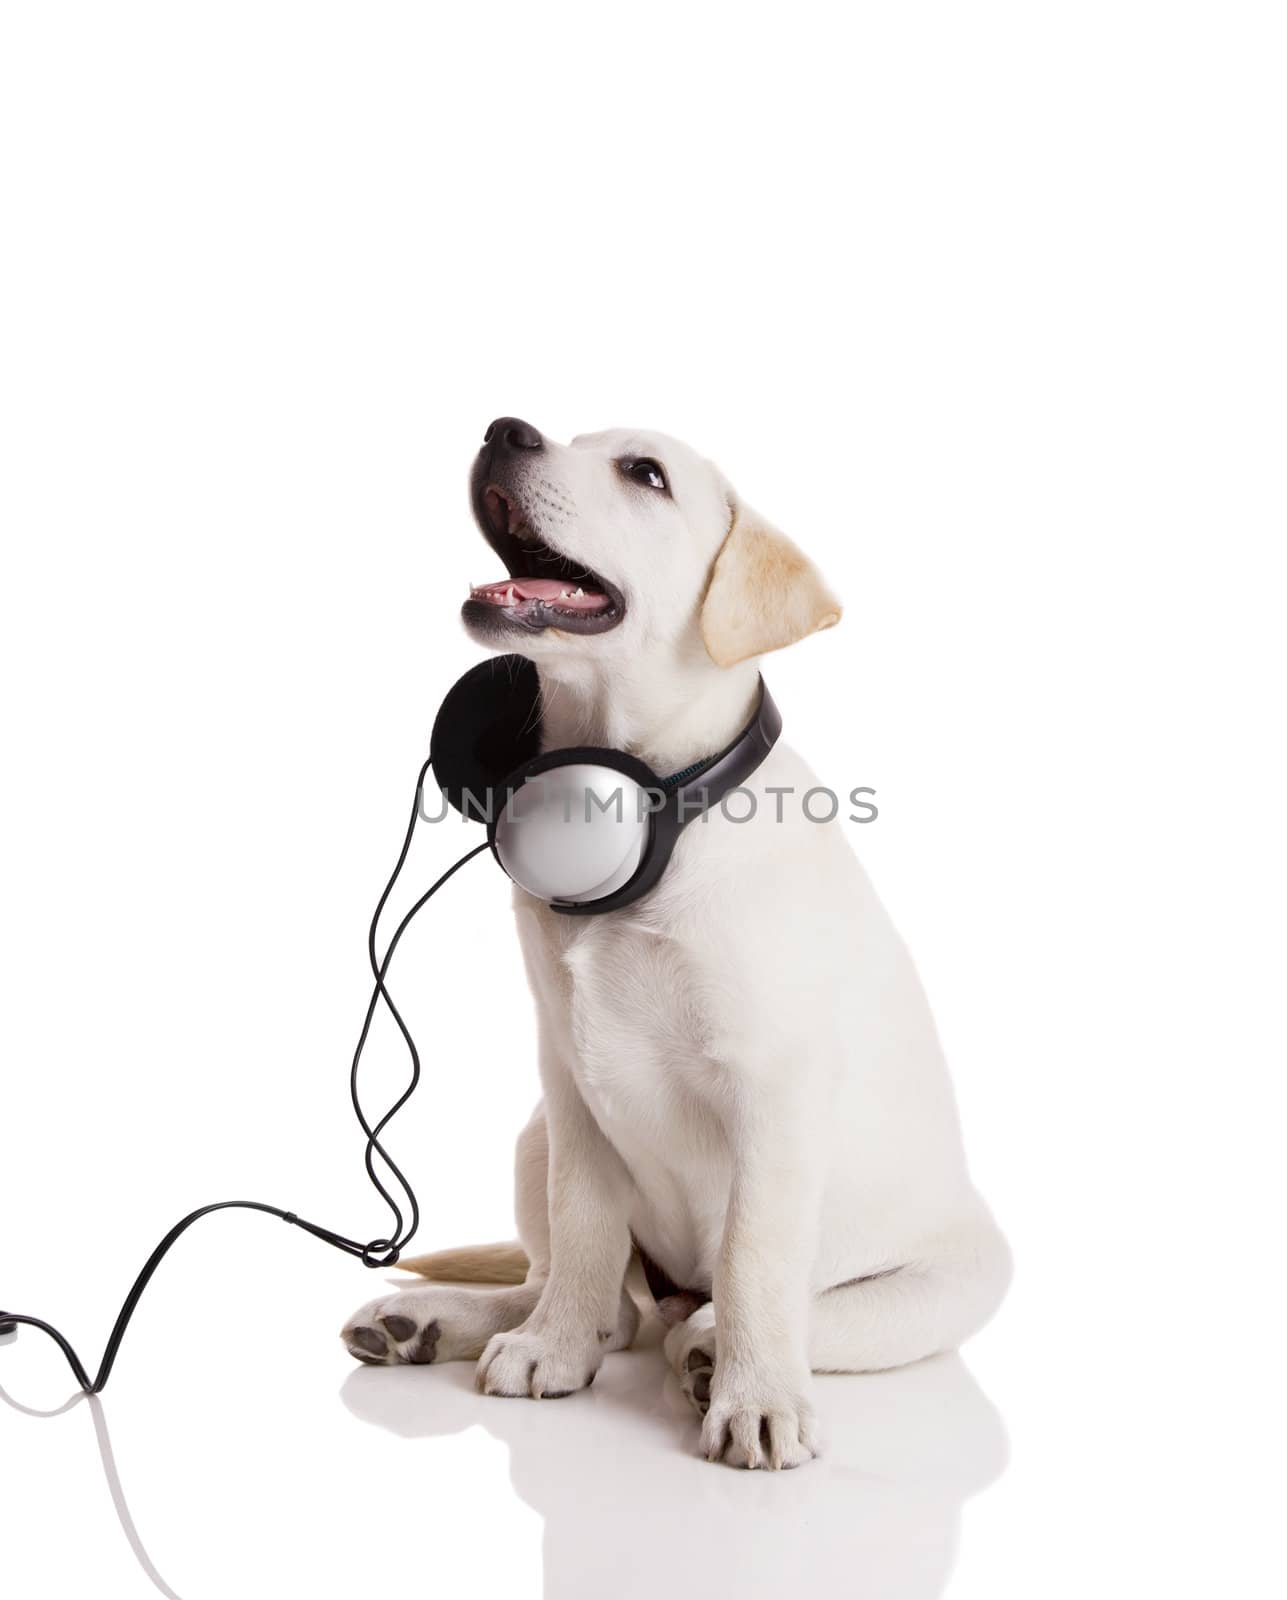 Dog listening to music by Iko